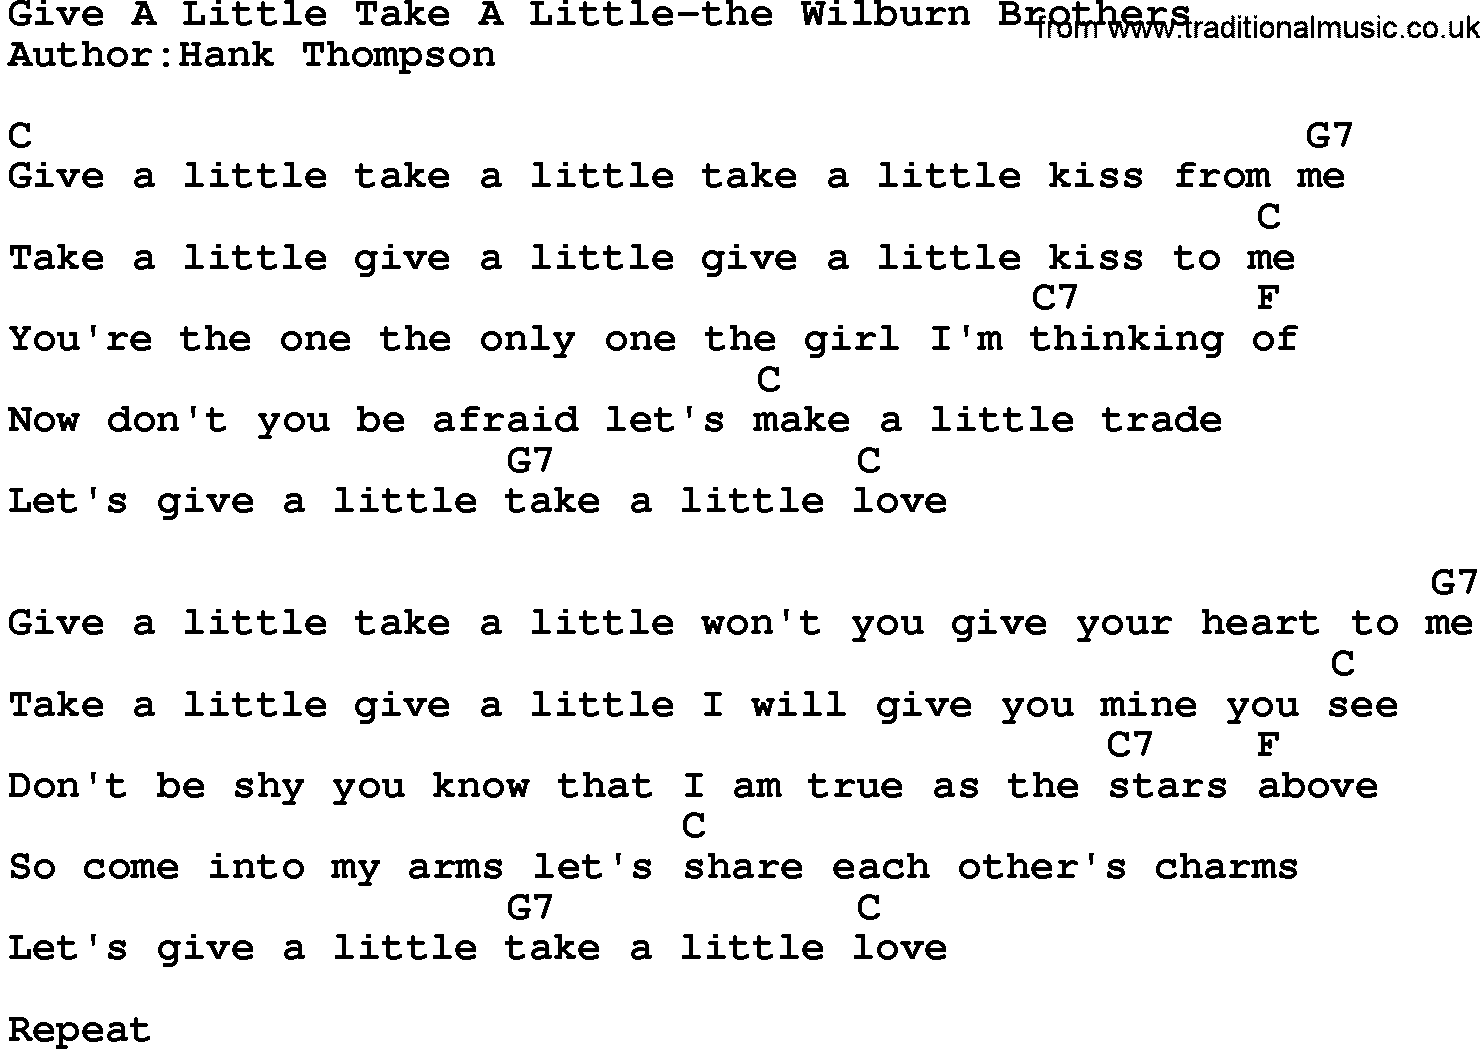 Country music song: Give A Little Take A Little-The Wilburn Brothers lyrics and chords